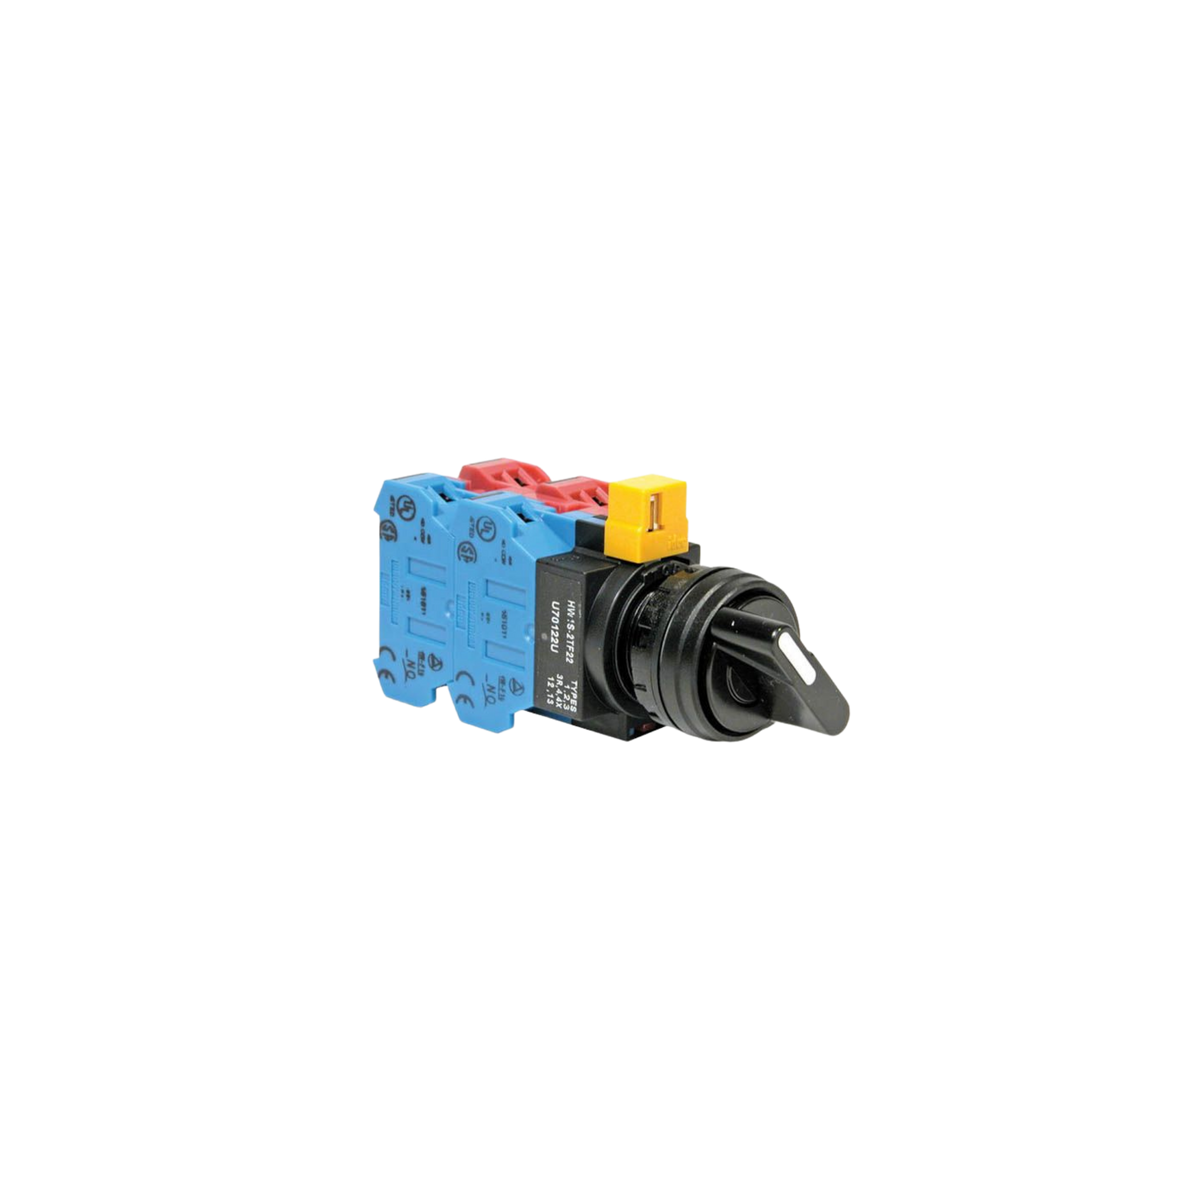 front side view of a selector switch unit with a blue and red contact block at the back, black housing, and a black switch in the front